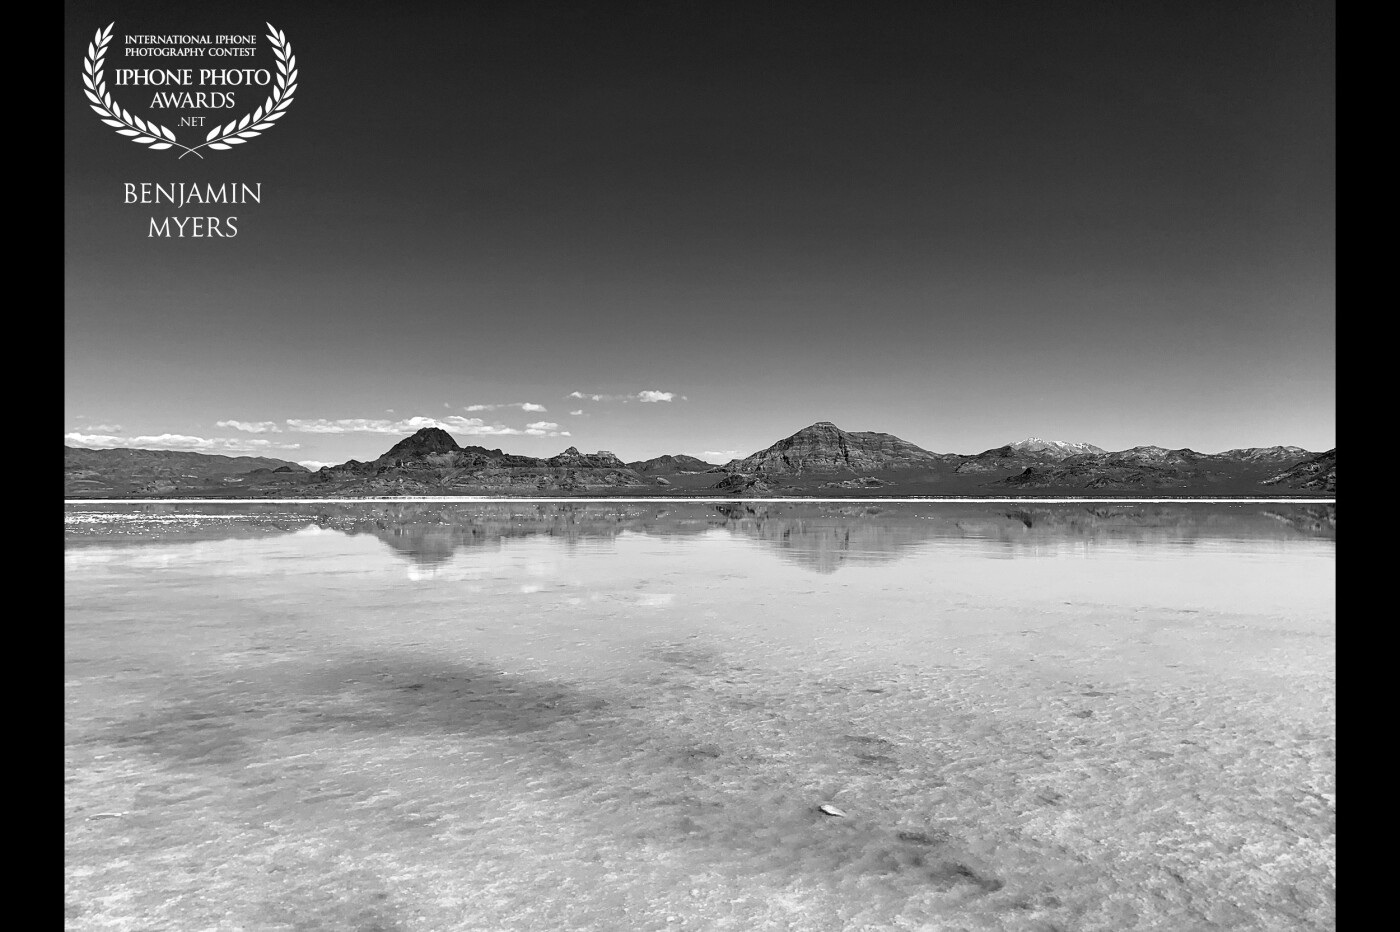 I took this photo when traveling through Utah back to California last summer. It’s worth a detour to drive out to the salt flats that are a few miles off of I-80. One day I’d like to race there. It looks otherworldly in black and white.